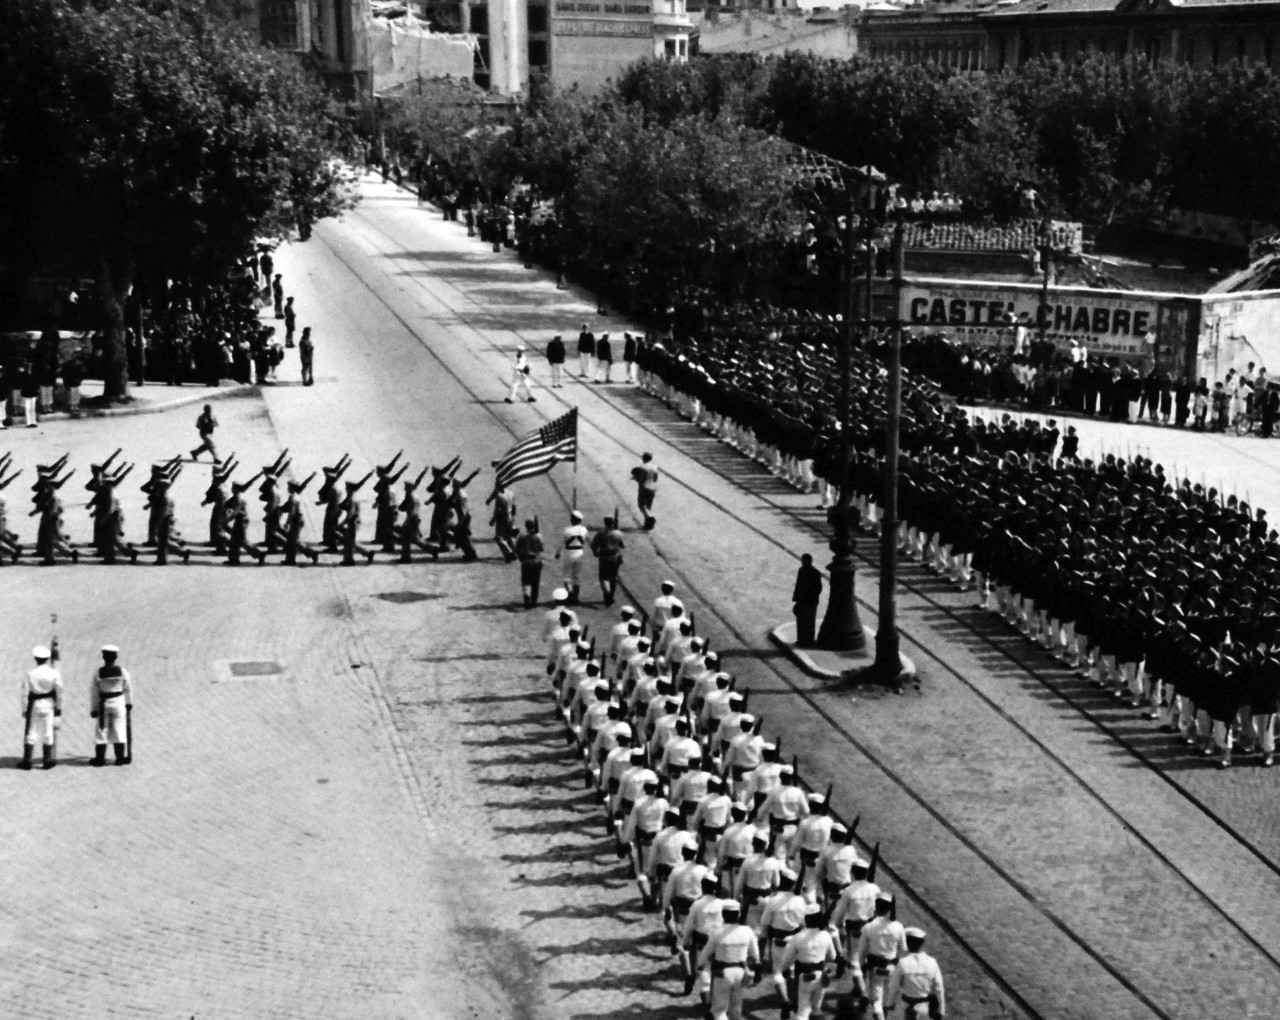 80-G-247152:  Allied Naval units take part in the victory parade in Toulon, France, to celebrate the return of French fleet to the port.   French blue jackets fall in, taken by USS Catoctin (AGC-5), received 14 September 1944.   Note, this specific image has US Marines and Sailors from USS Philadelphia (CL-41) wheel into position before the Toulon War Memorial.  (3/12/2014).